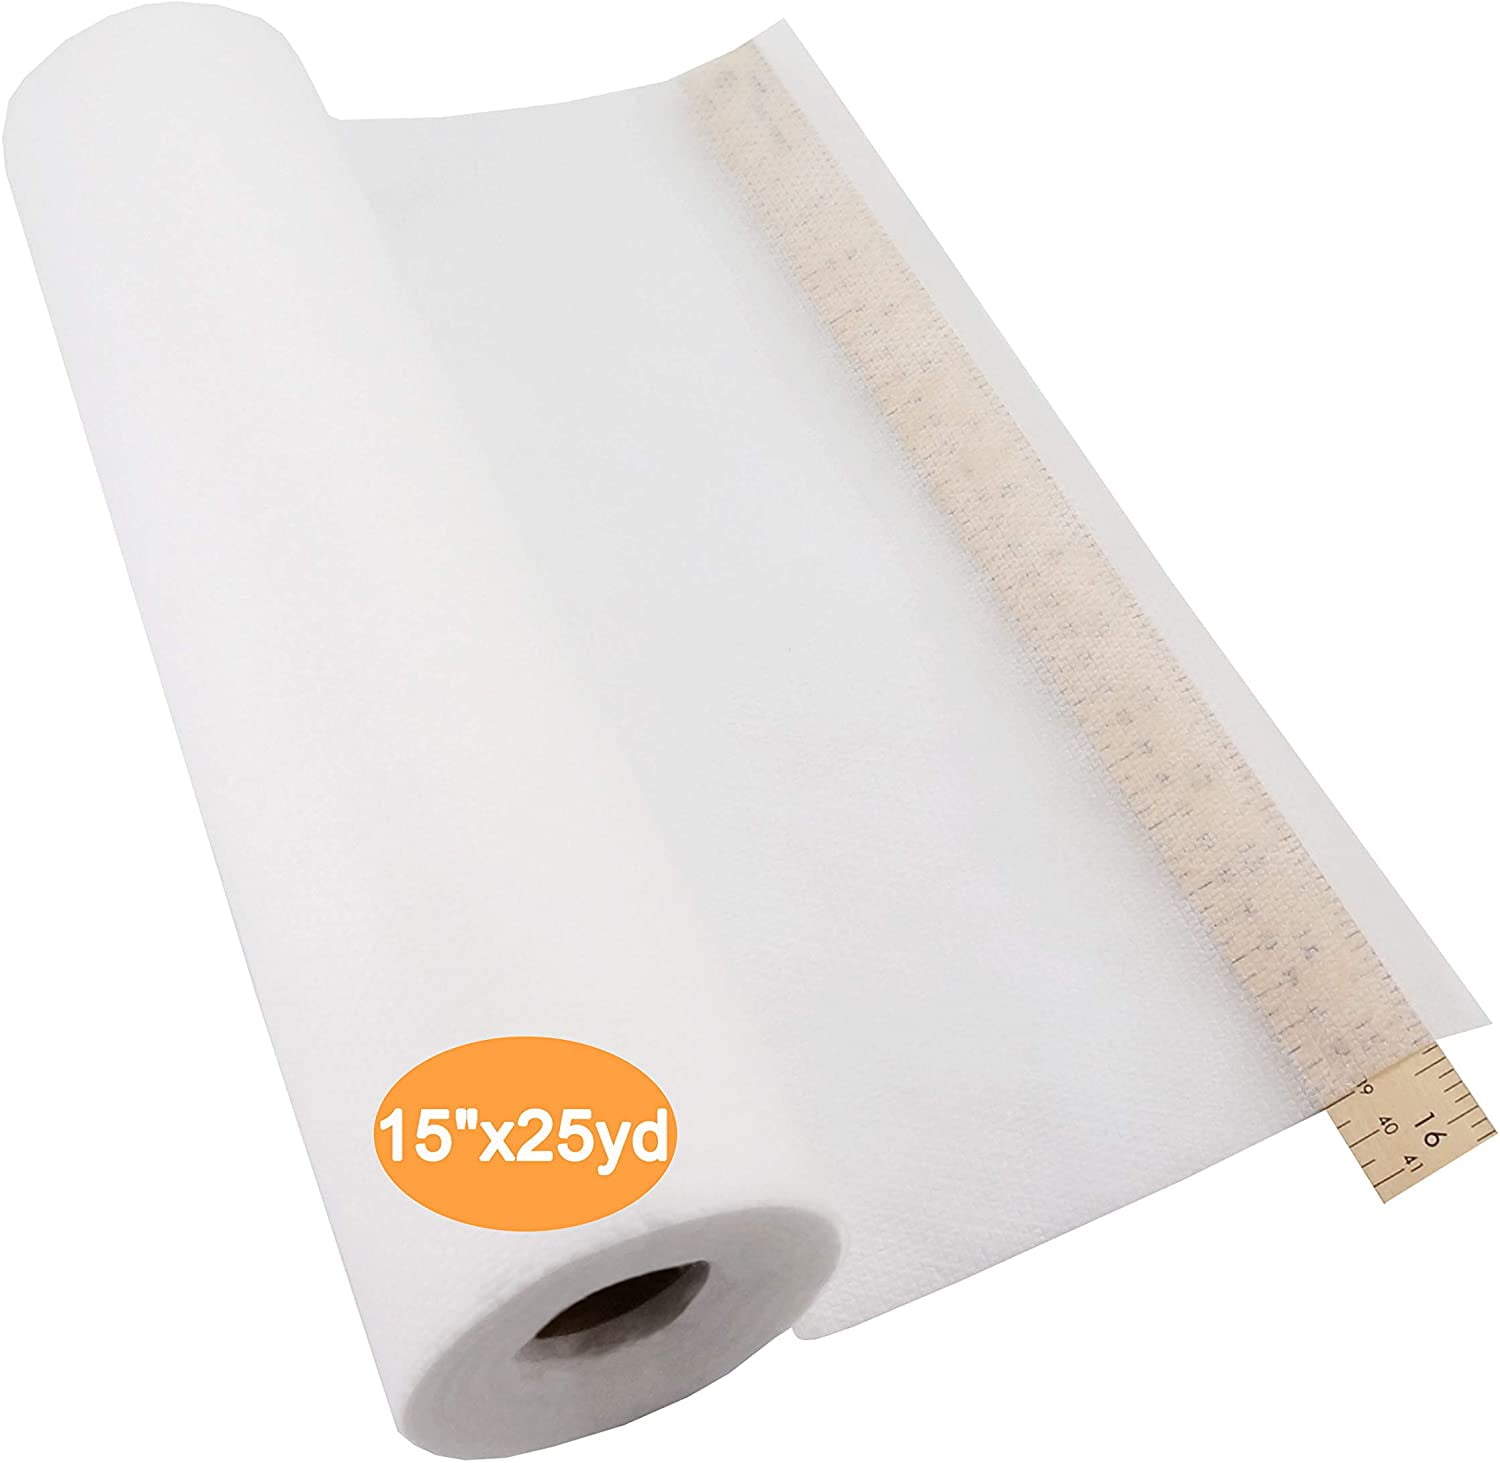  Threadart Sticky Back Tearaway Embroidery Stabilizer, 9.5 x  10 yd Roll, for Machine Embroidery